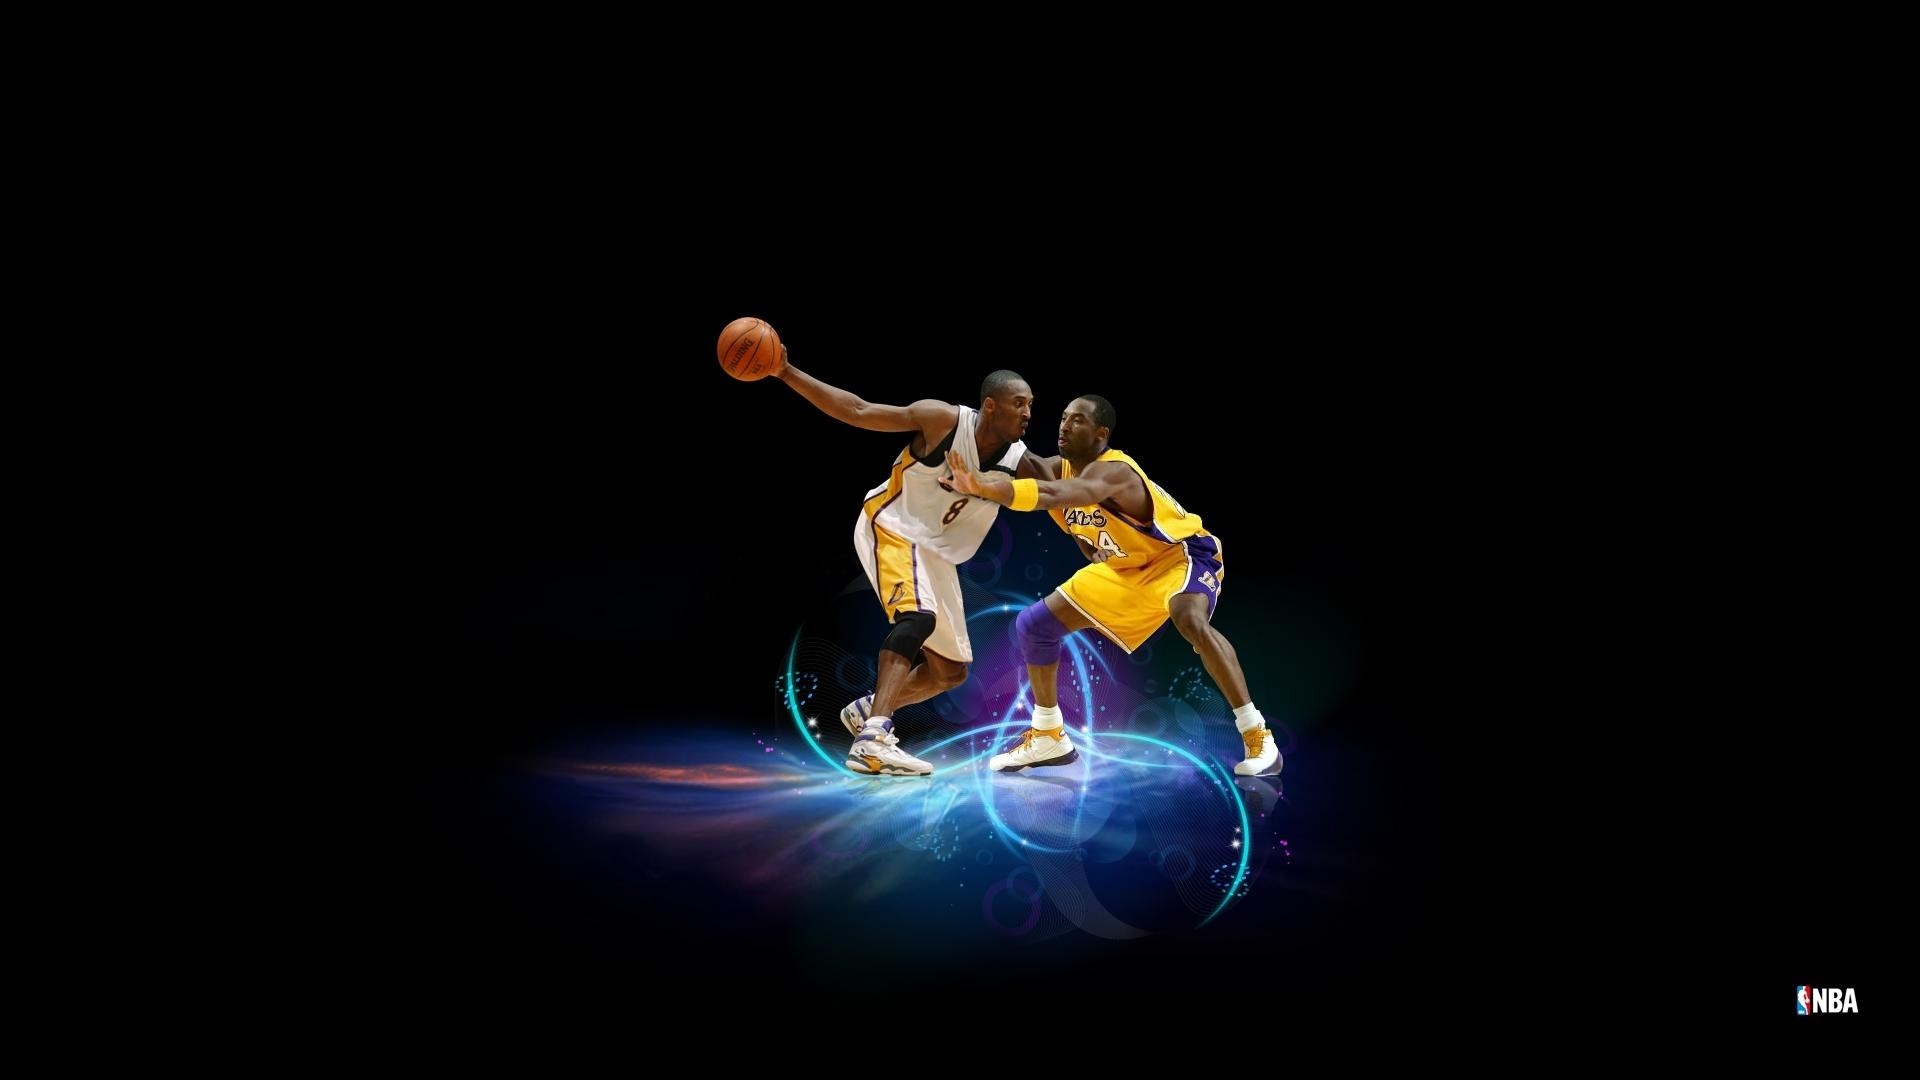 Cool Basketball Wallpapers HD (61+ images)